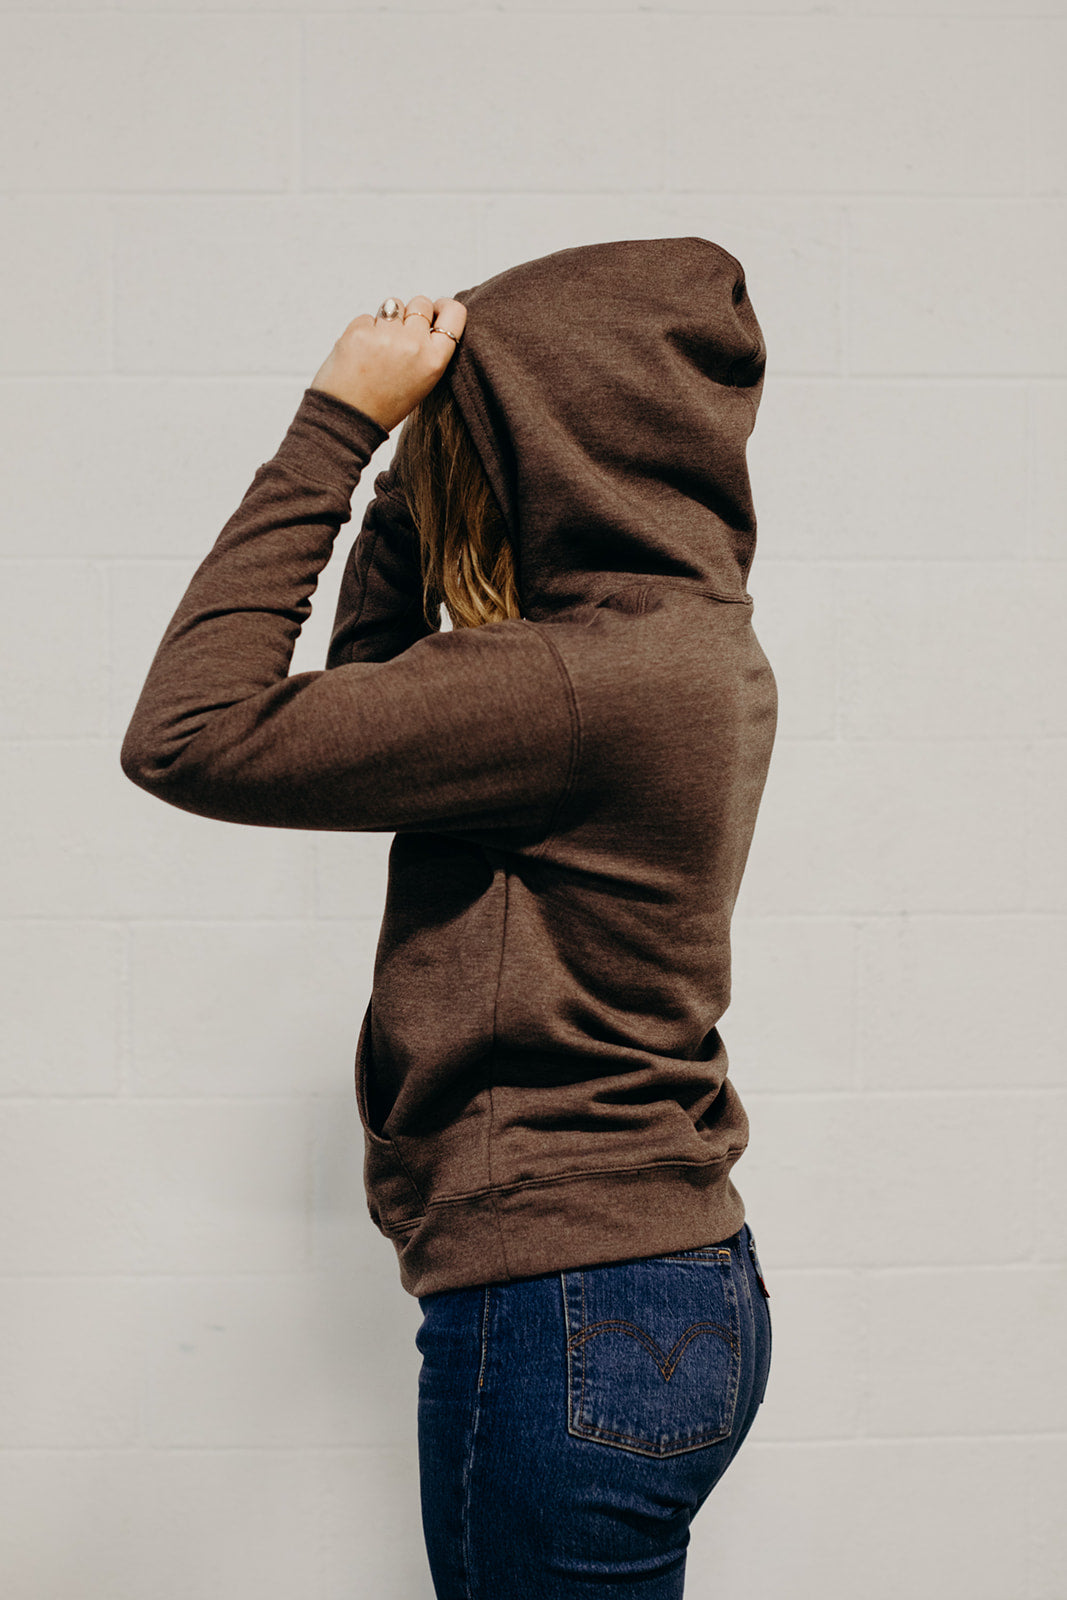 Brown ethically made unisex pull over hoodie with beige Ungalli logo